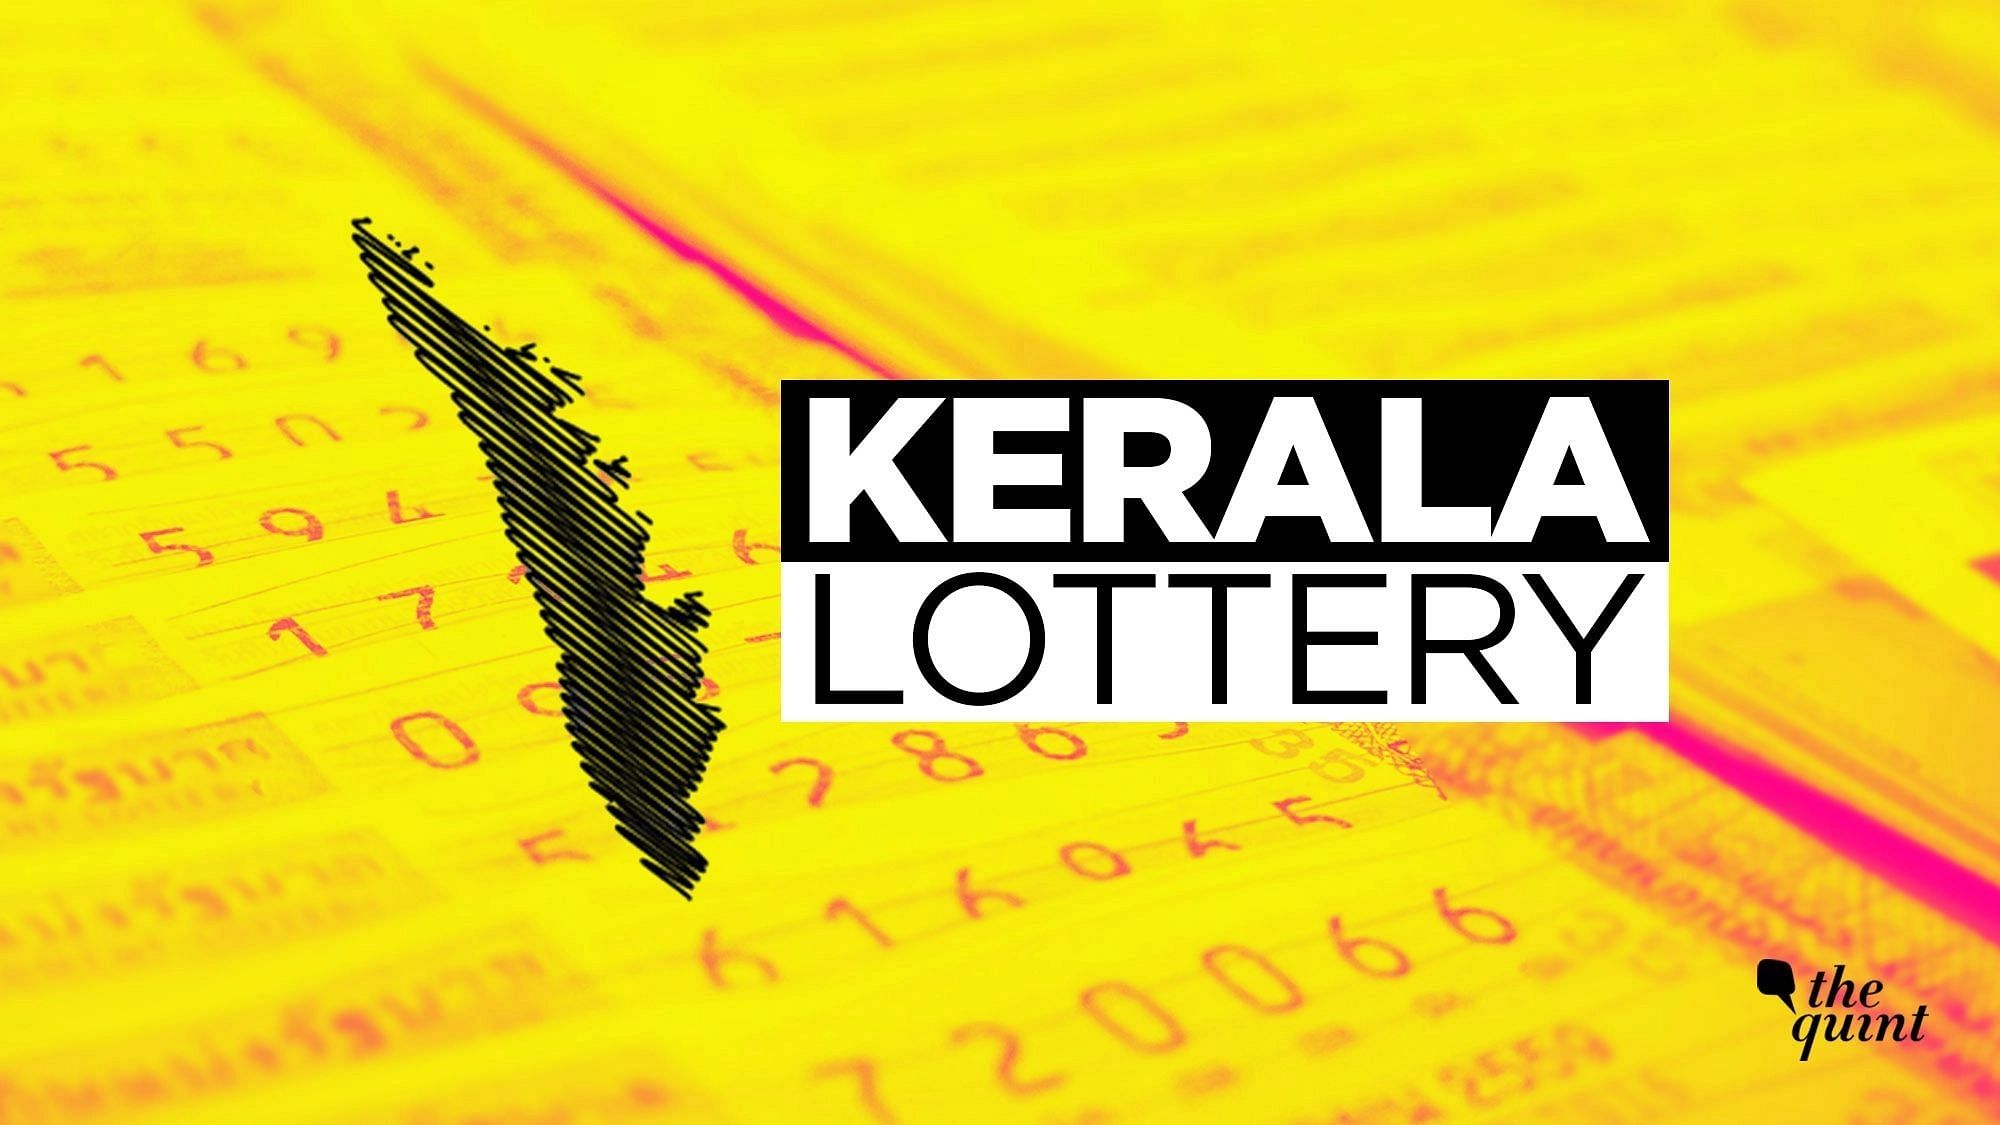 <div class="paragraphs"><p>Here's the Kerala lottery result today for&nbsp;WIN-WIN(W-692) on Monday, 7 November 2022.</p></div>